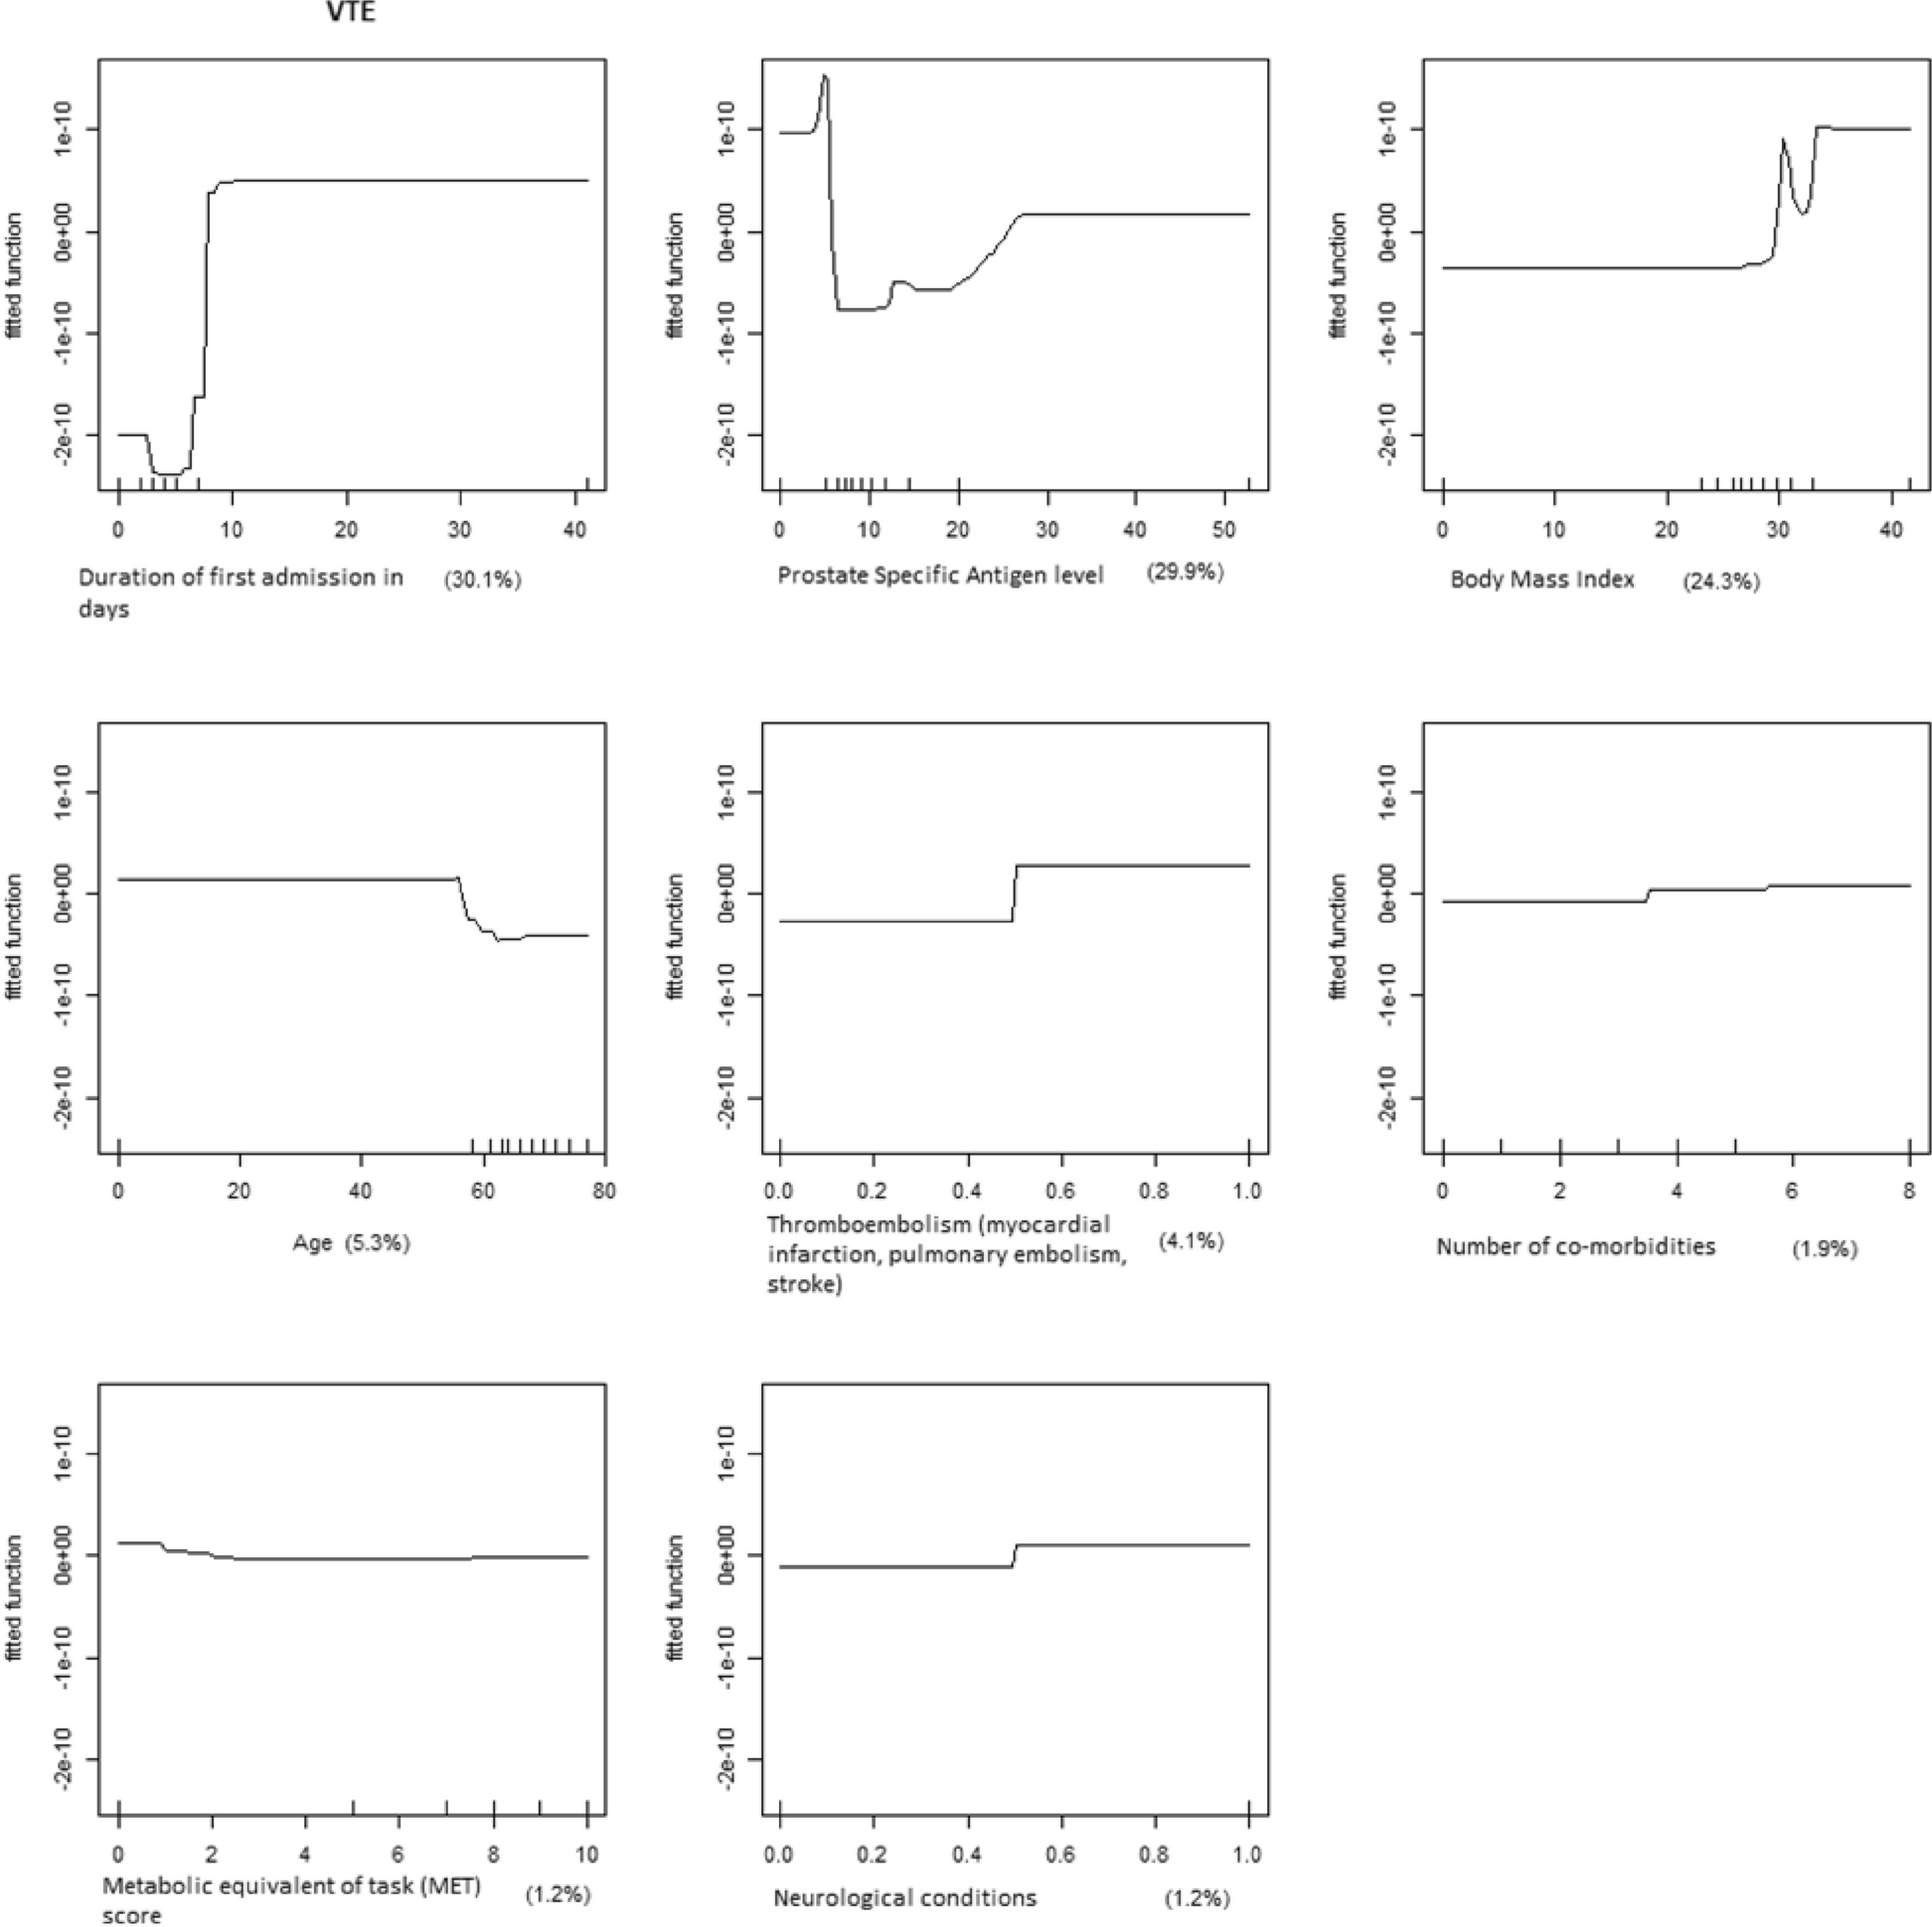 Predictive accuracy of boosted regression model in estimating risk of venous thromboembolism following minimally invasive radical surgery in pharmacological prophylaxis-naïve men with prostate cancer